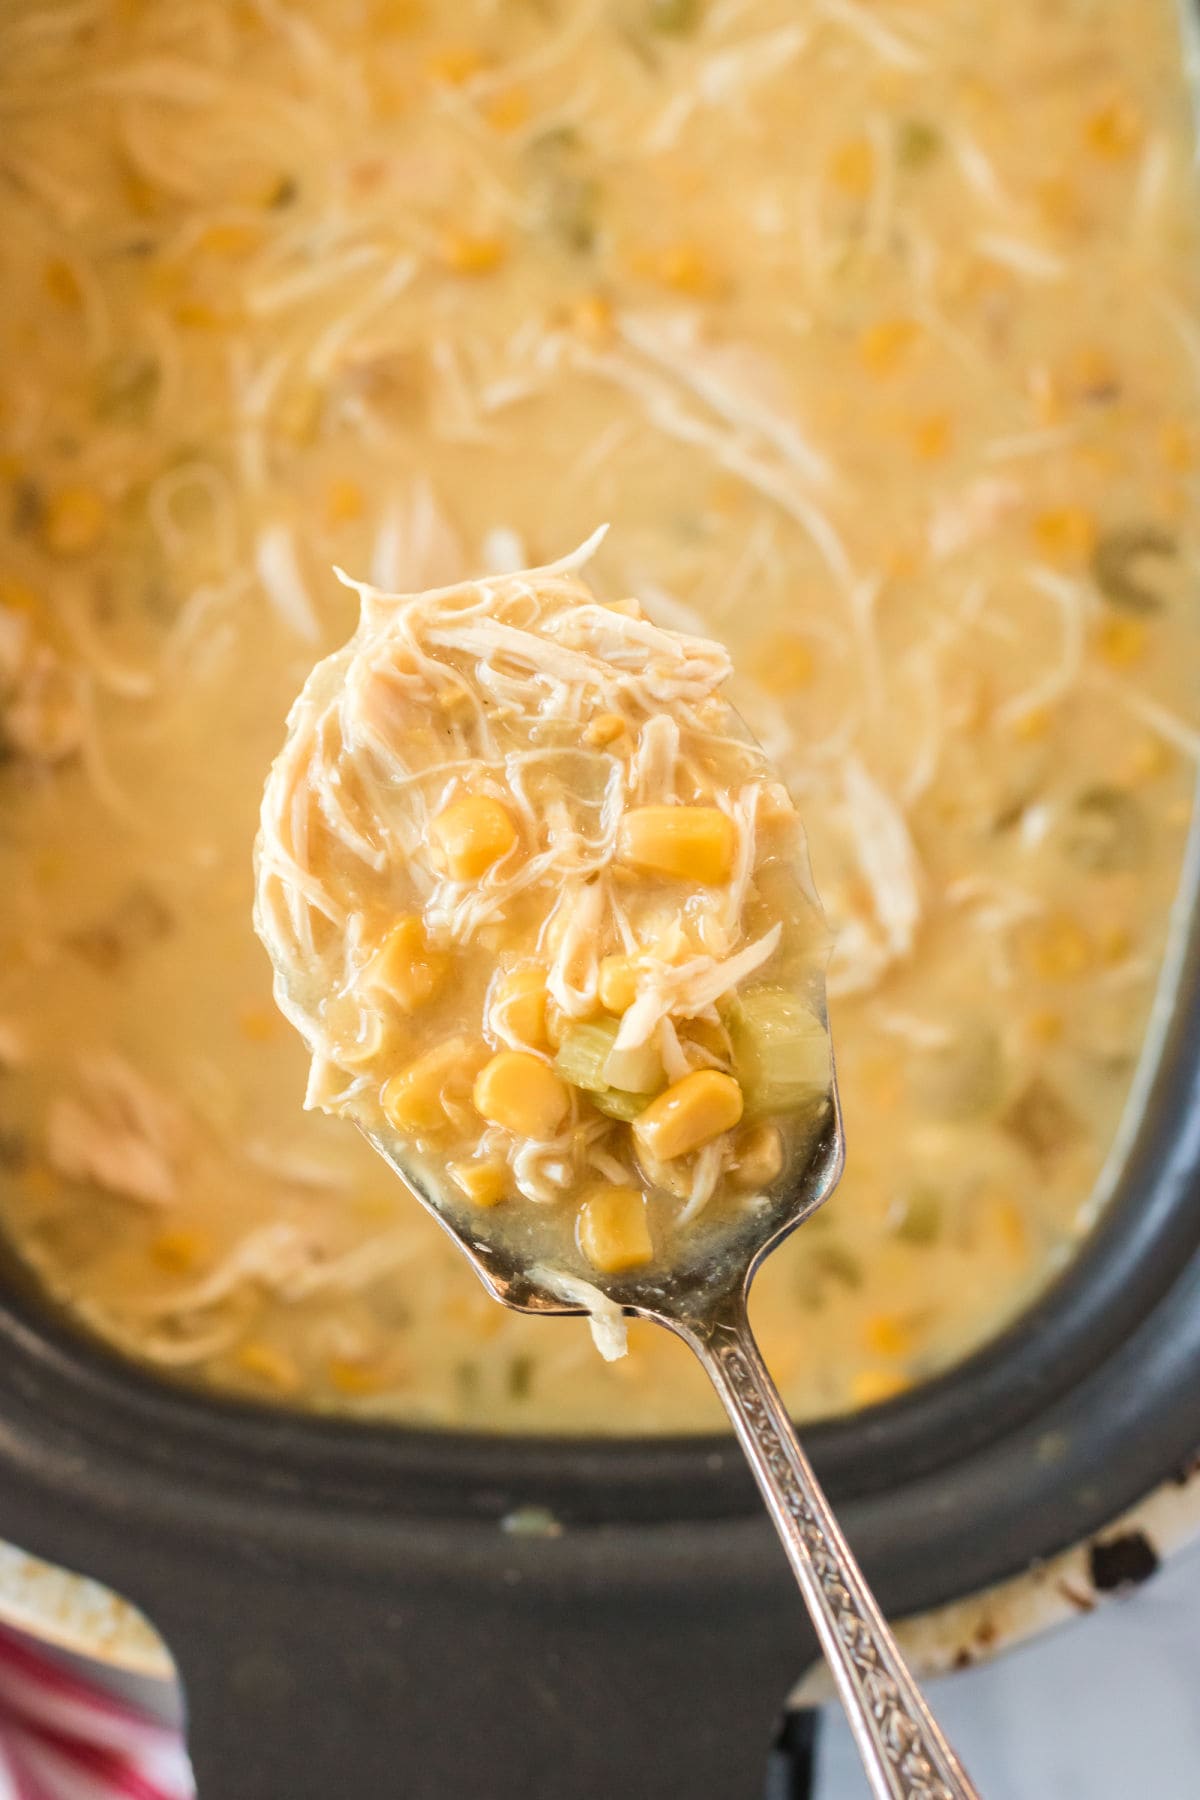 Chicken corn chowder with a spoon.